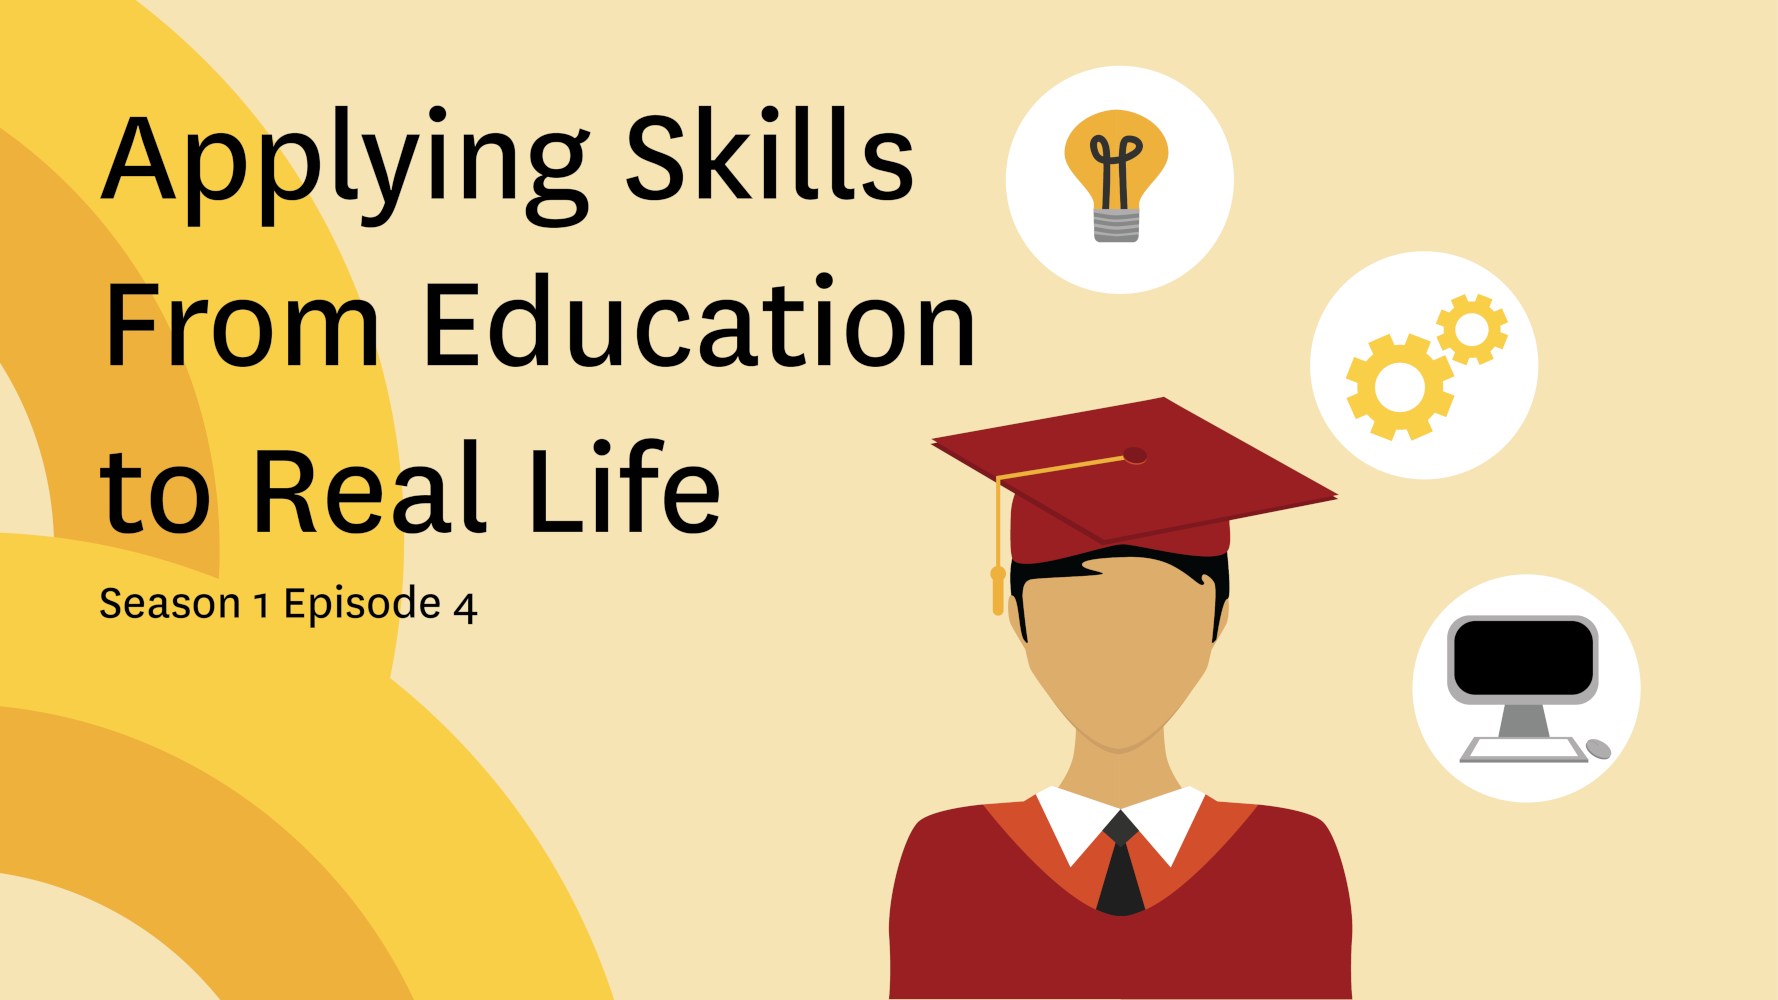 Applying Skills from Education to Real Life